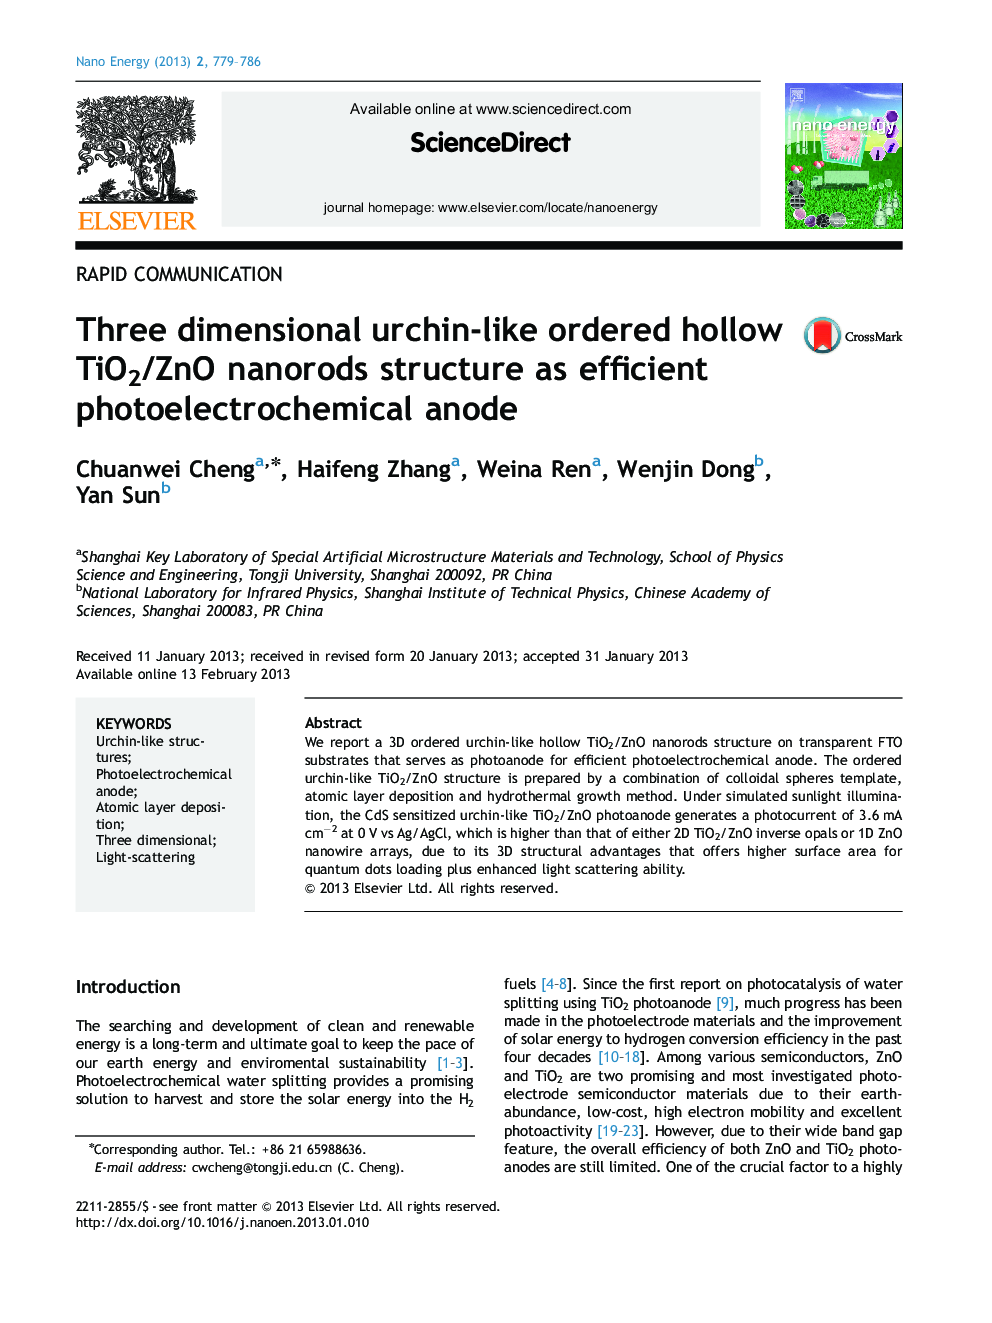 Three dimensional urchin-like ordered hollow TiO2/ZnO nanorods structure as efficient photoelectrochemical anode